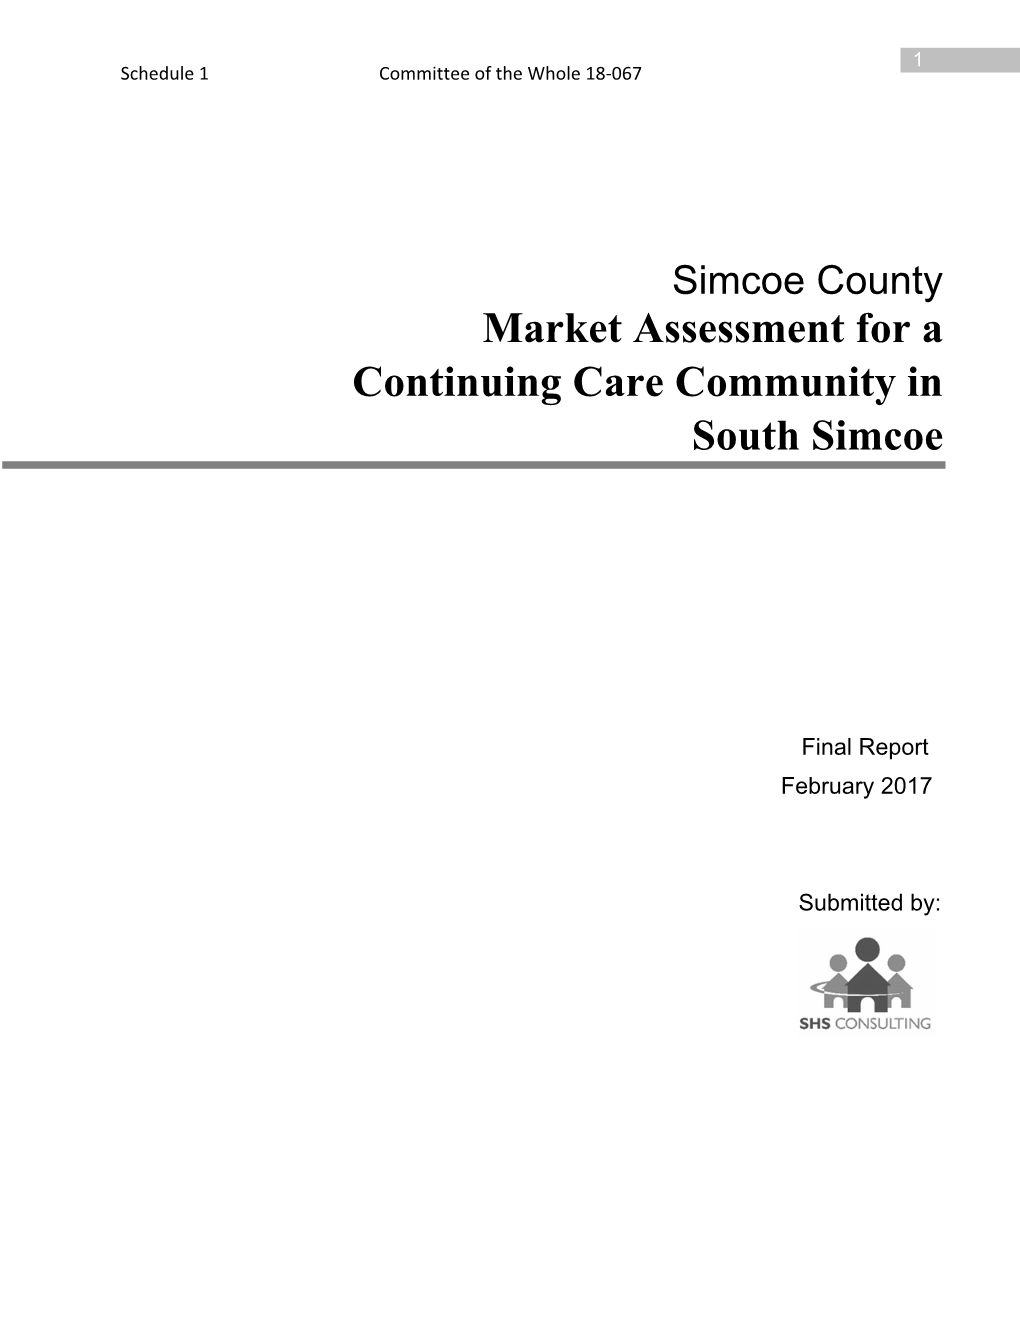 Market Assessment for a Continuing Care Community in South Simcoe